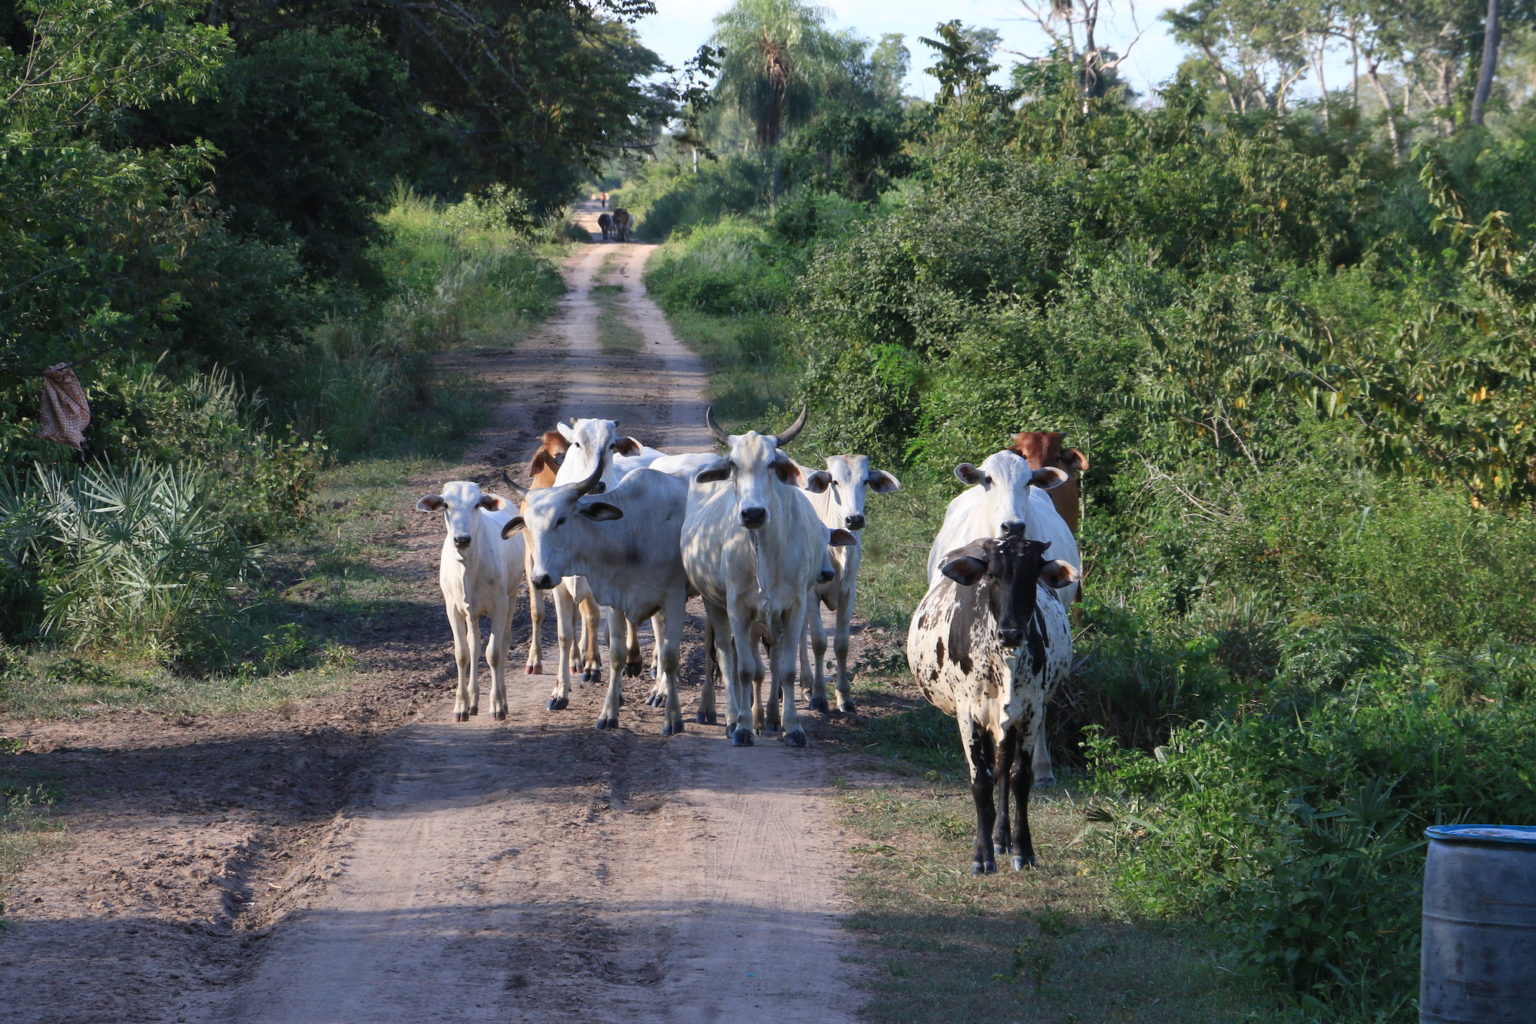 A small herd of cattle near the entrance to the area that is adjacent to the municipality of El Carmen Rivero Tórrez. Image by Fernando Portugal.